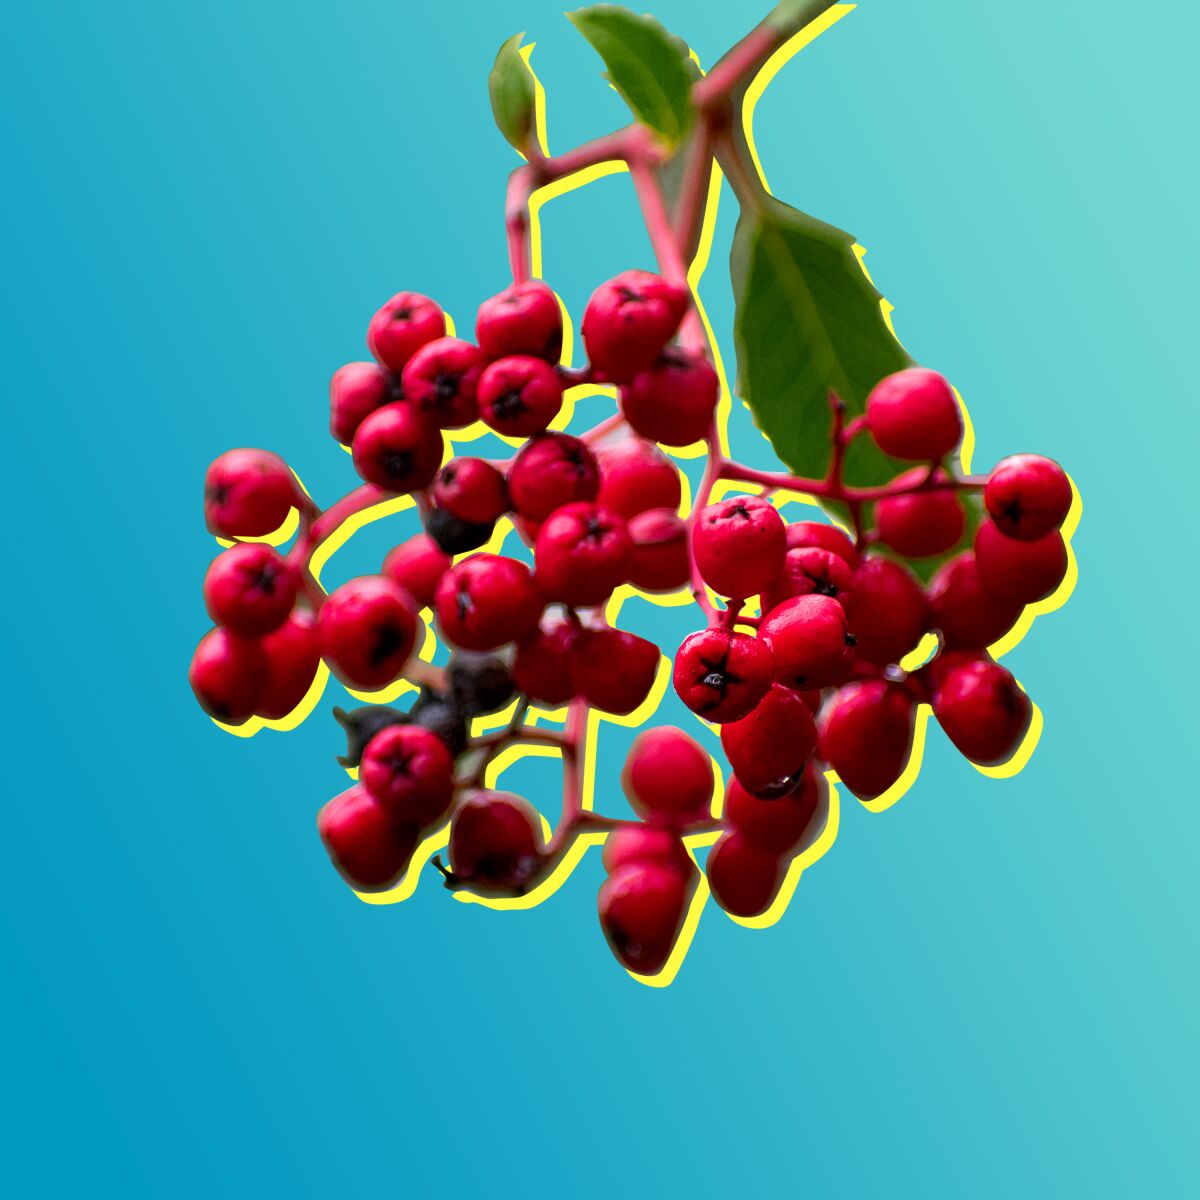 Red berries from the toyon, a California native shrub.